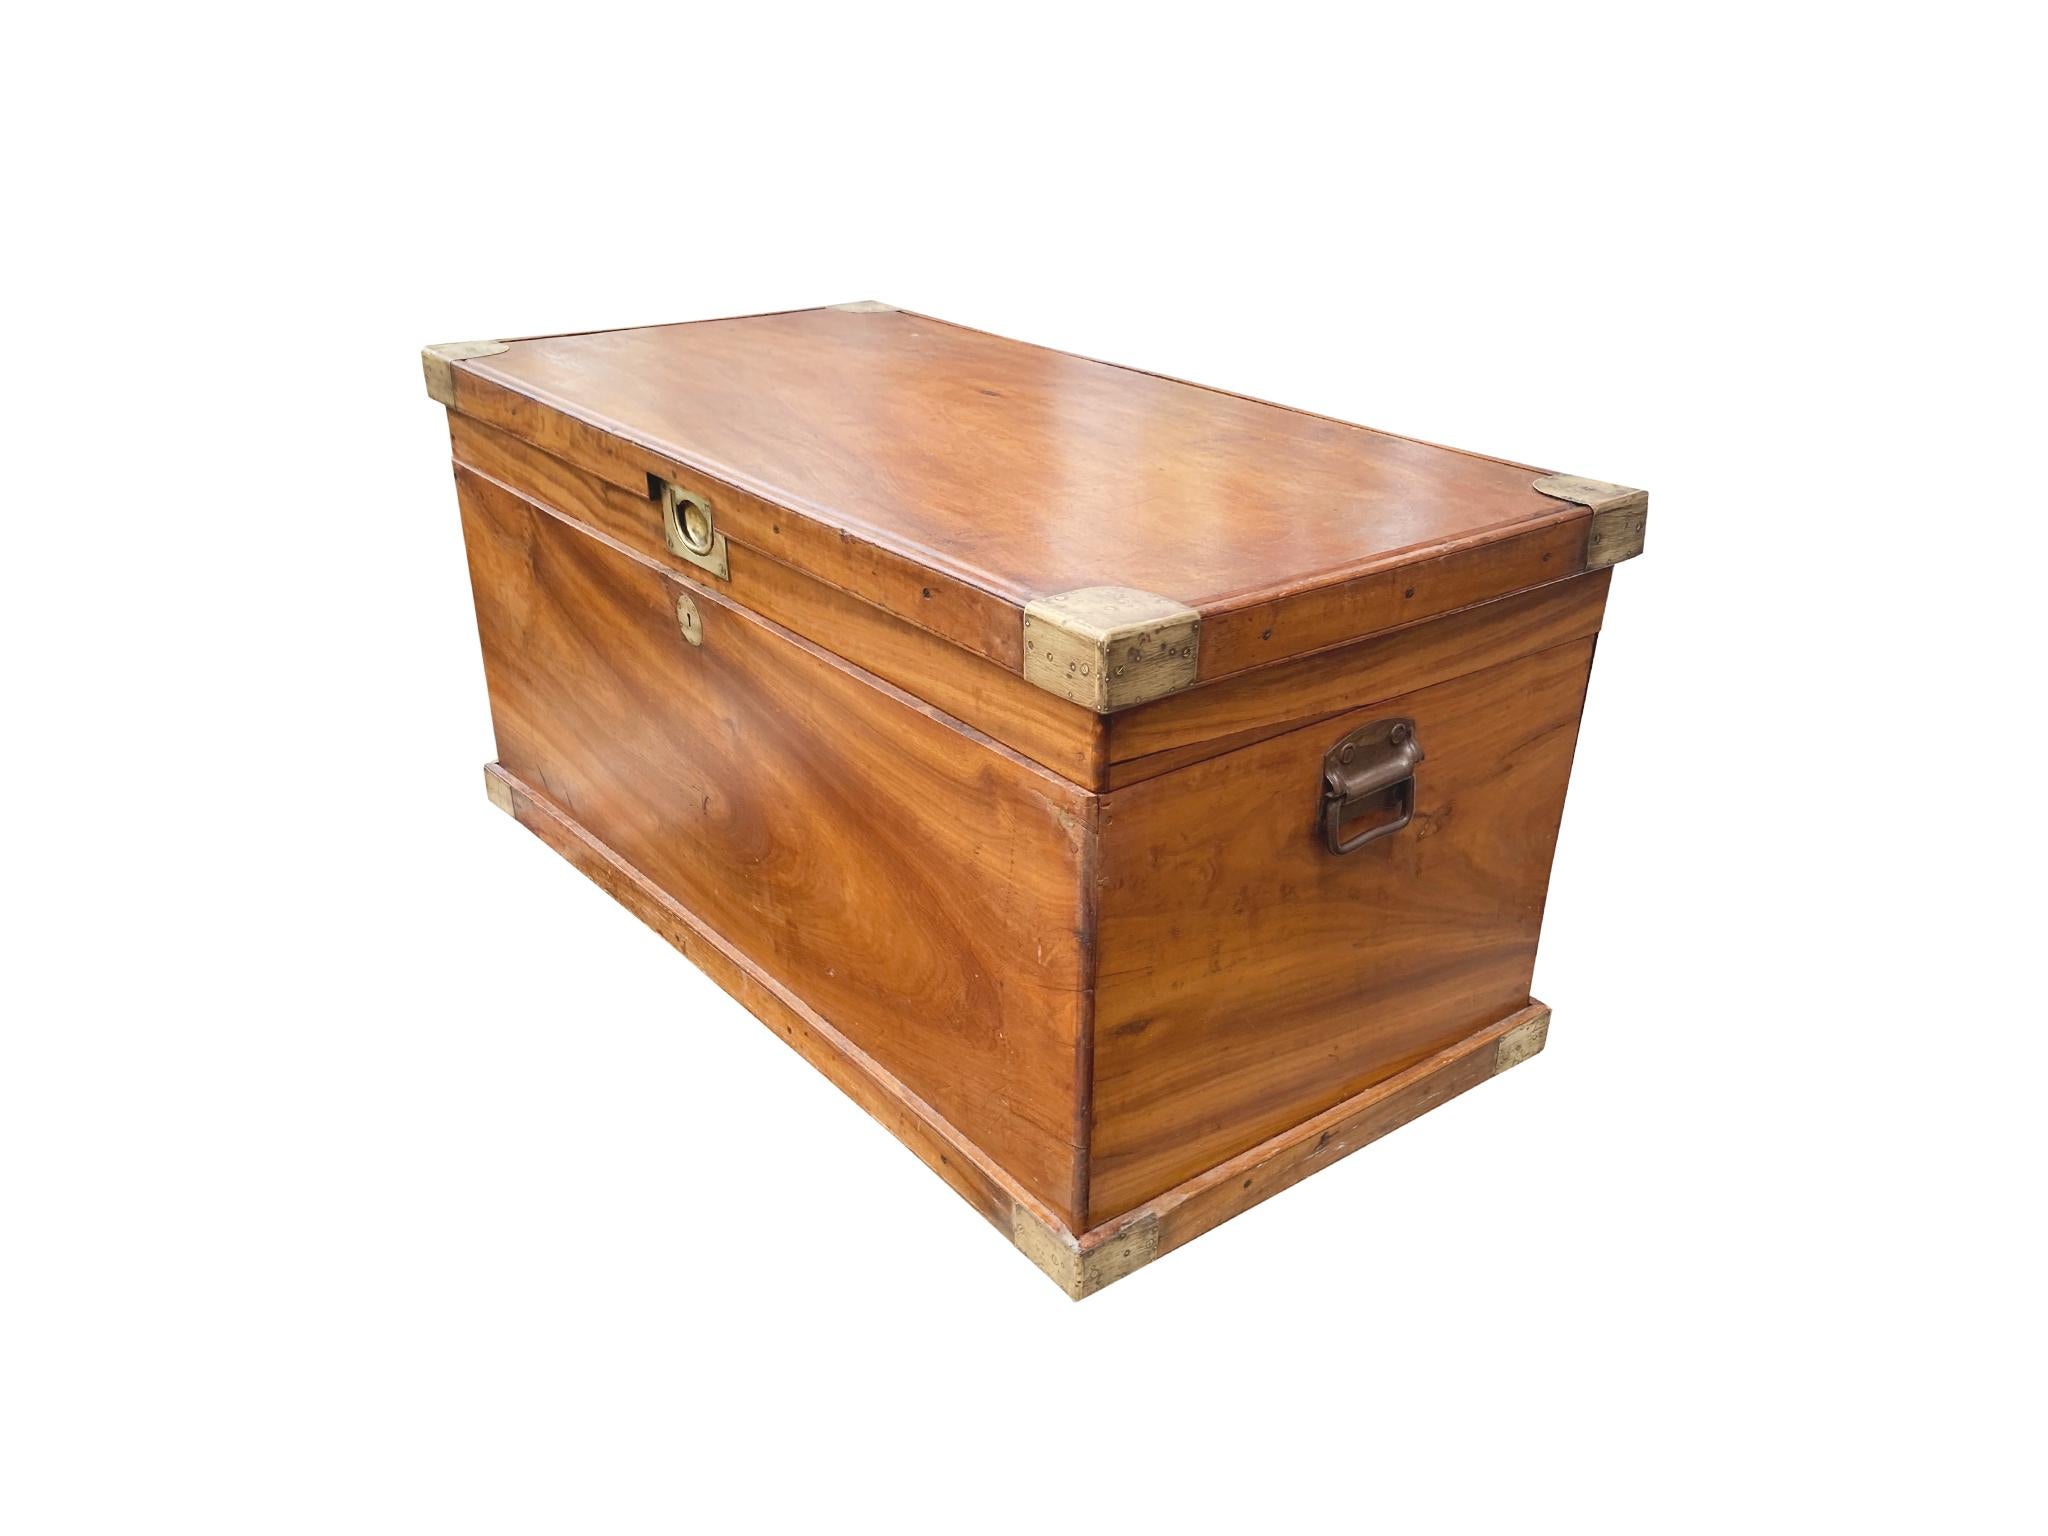 Hand-Crafted 19th Century Camphorwood Trunk